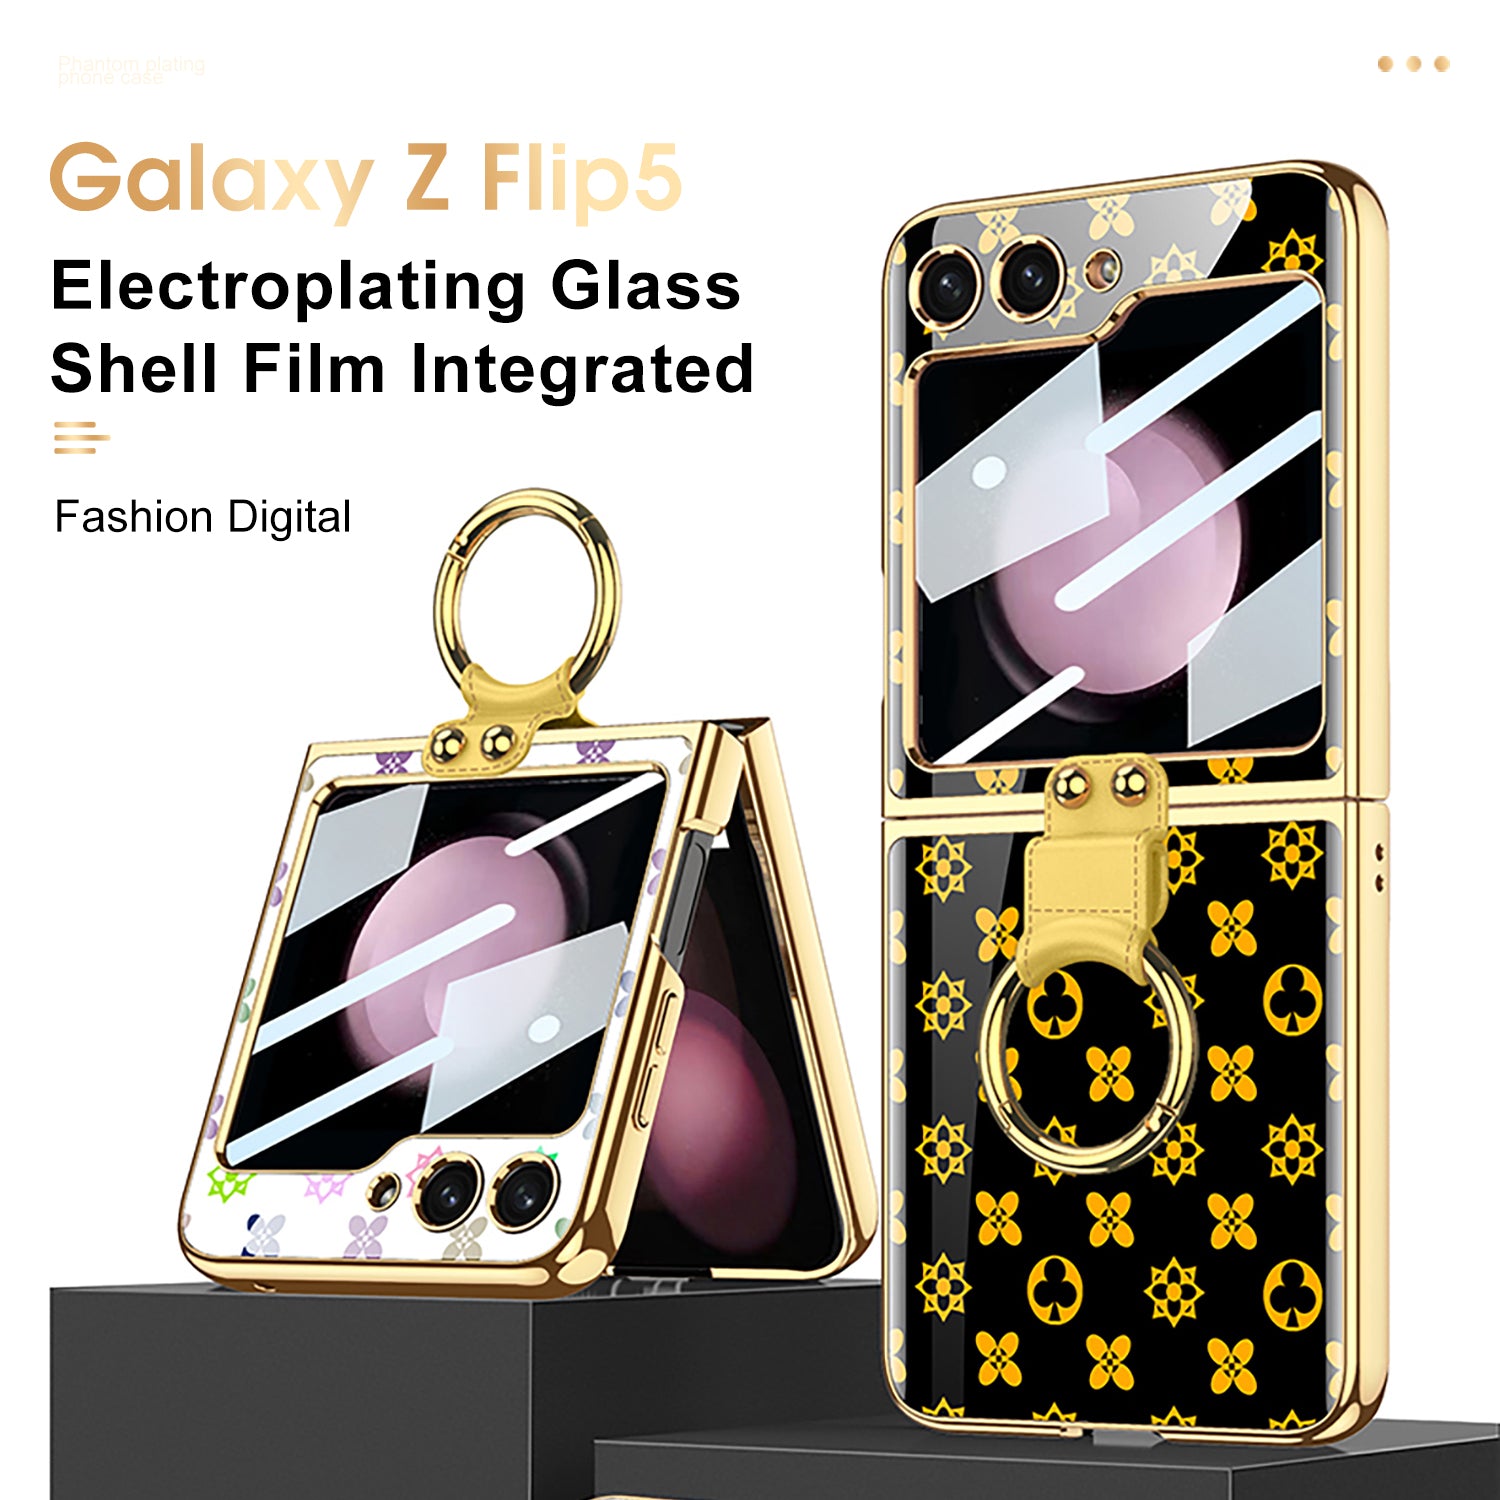 Electroplating Ring Holder Drop-proof Phone Case With Back Screen Protector For Samsung Galaxy Z Flip5 Flip4 Flip3 - Mycasety Mycasety